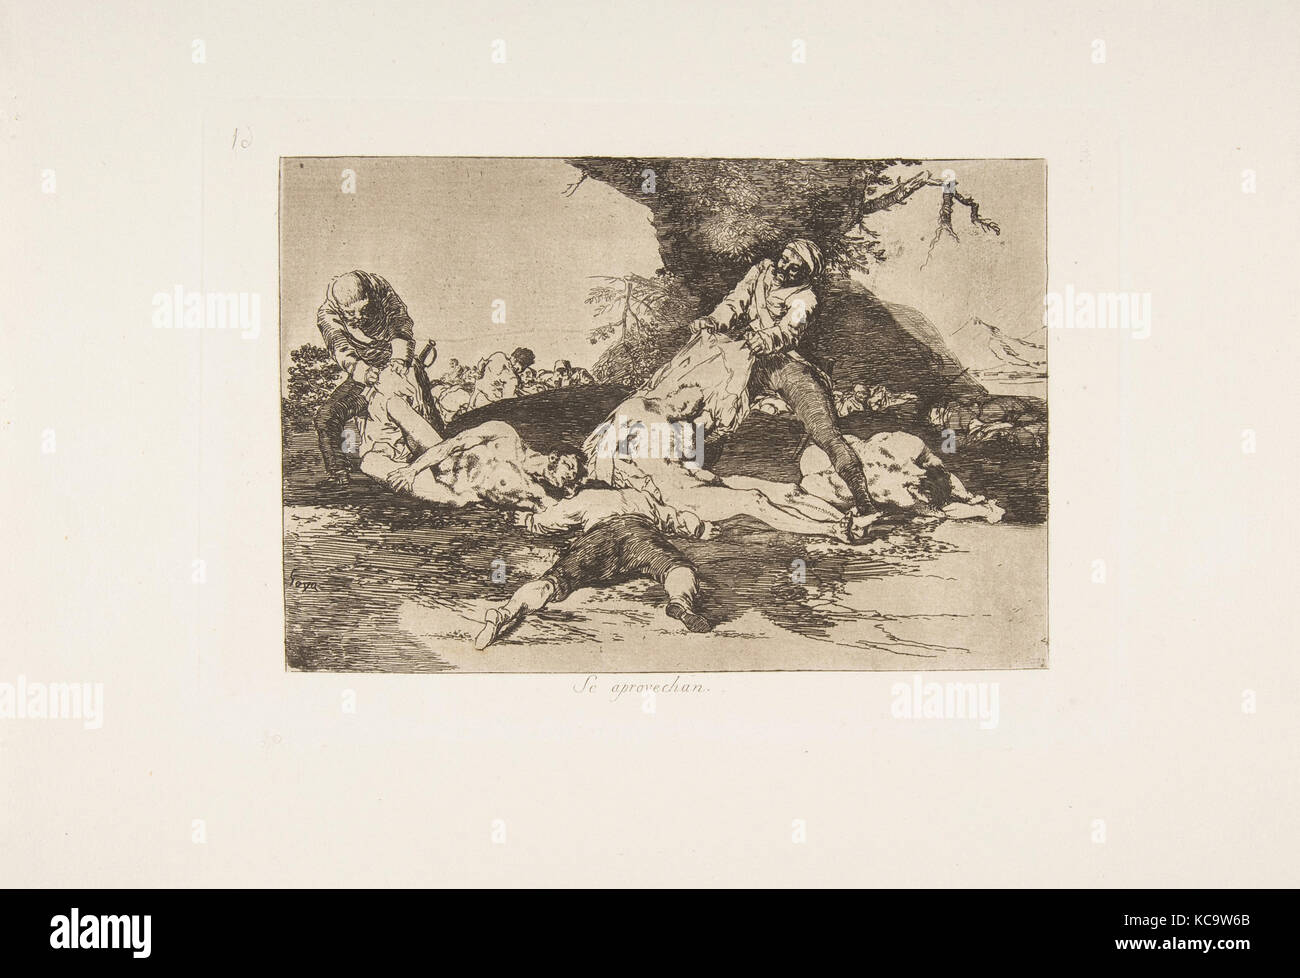 Plate 16 from 'The Disasters of War' (Los Desastres de La Guerra):' They make use of them.' (Se aprovechan.), Goya, 1810 Stock Photo